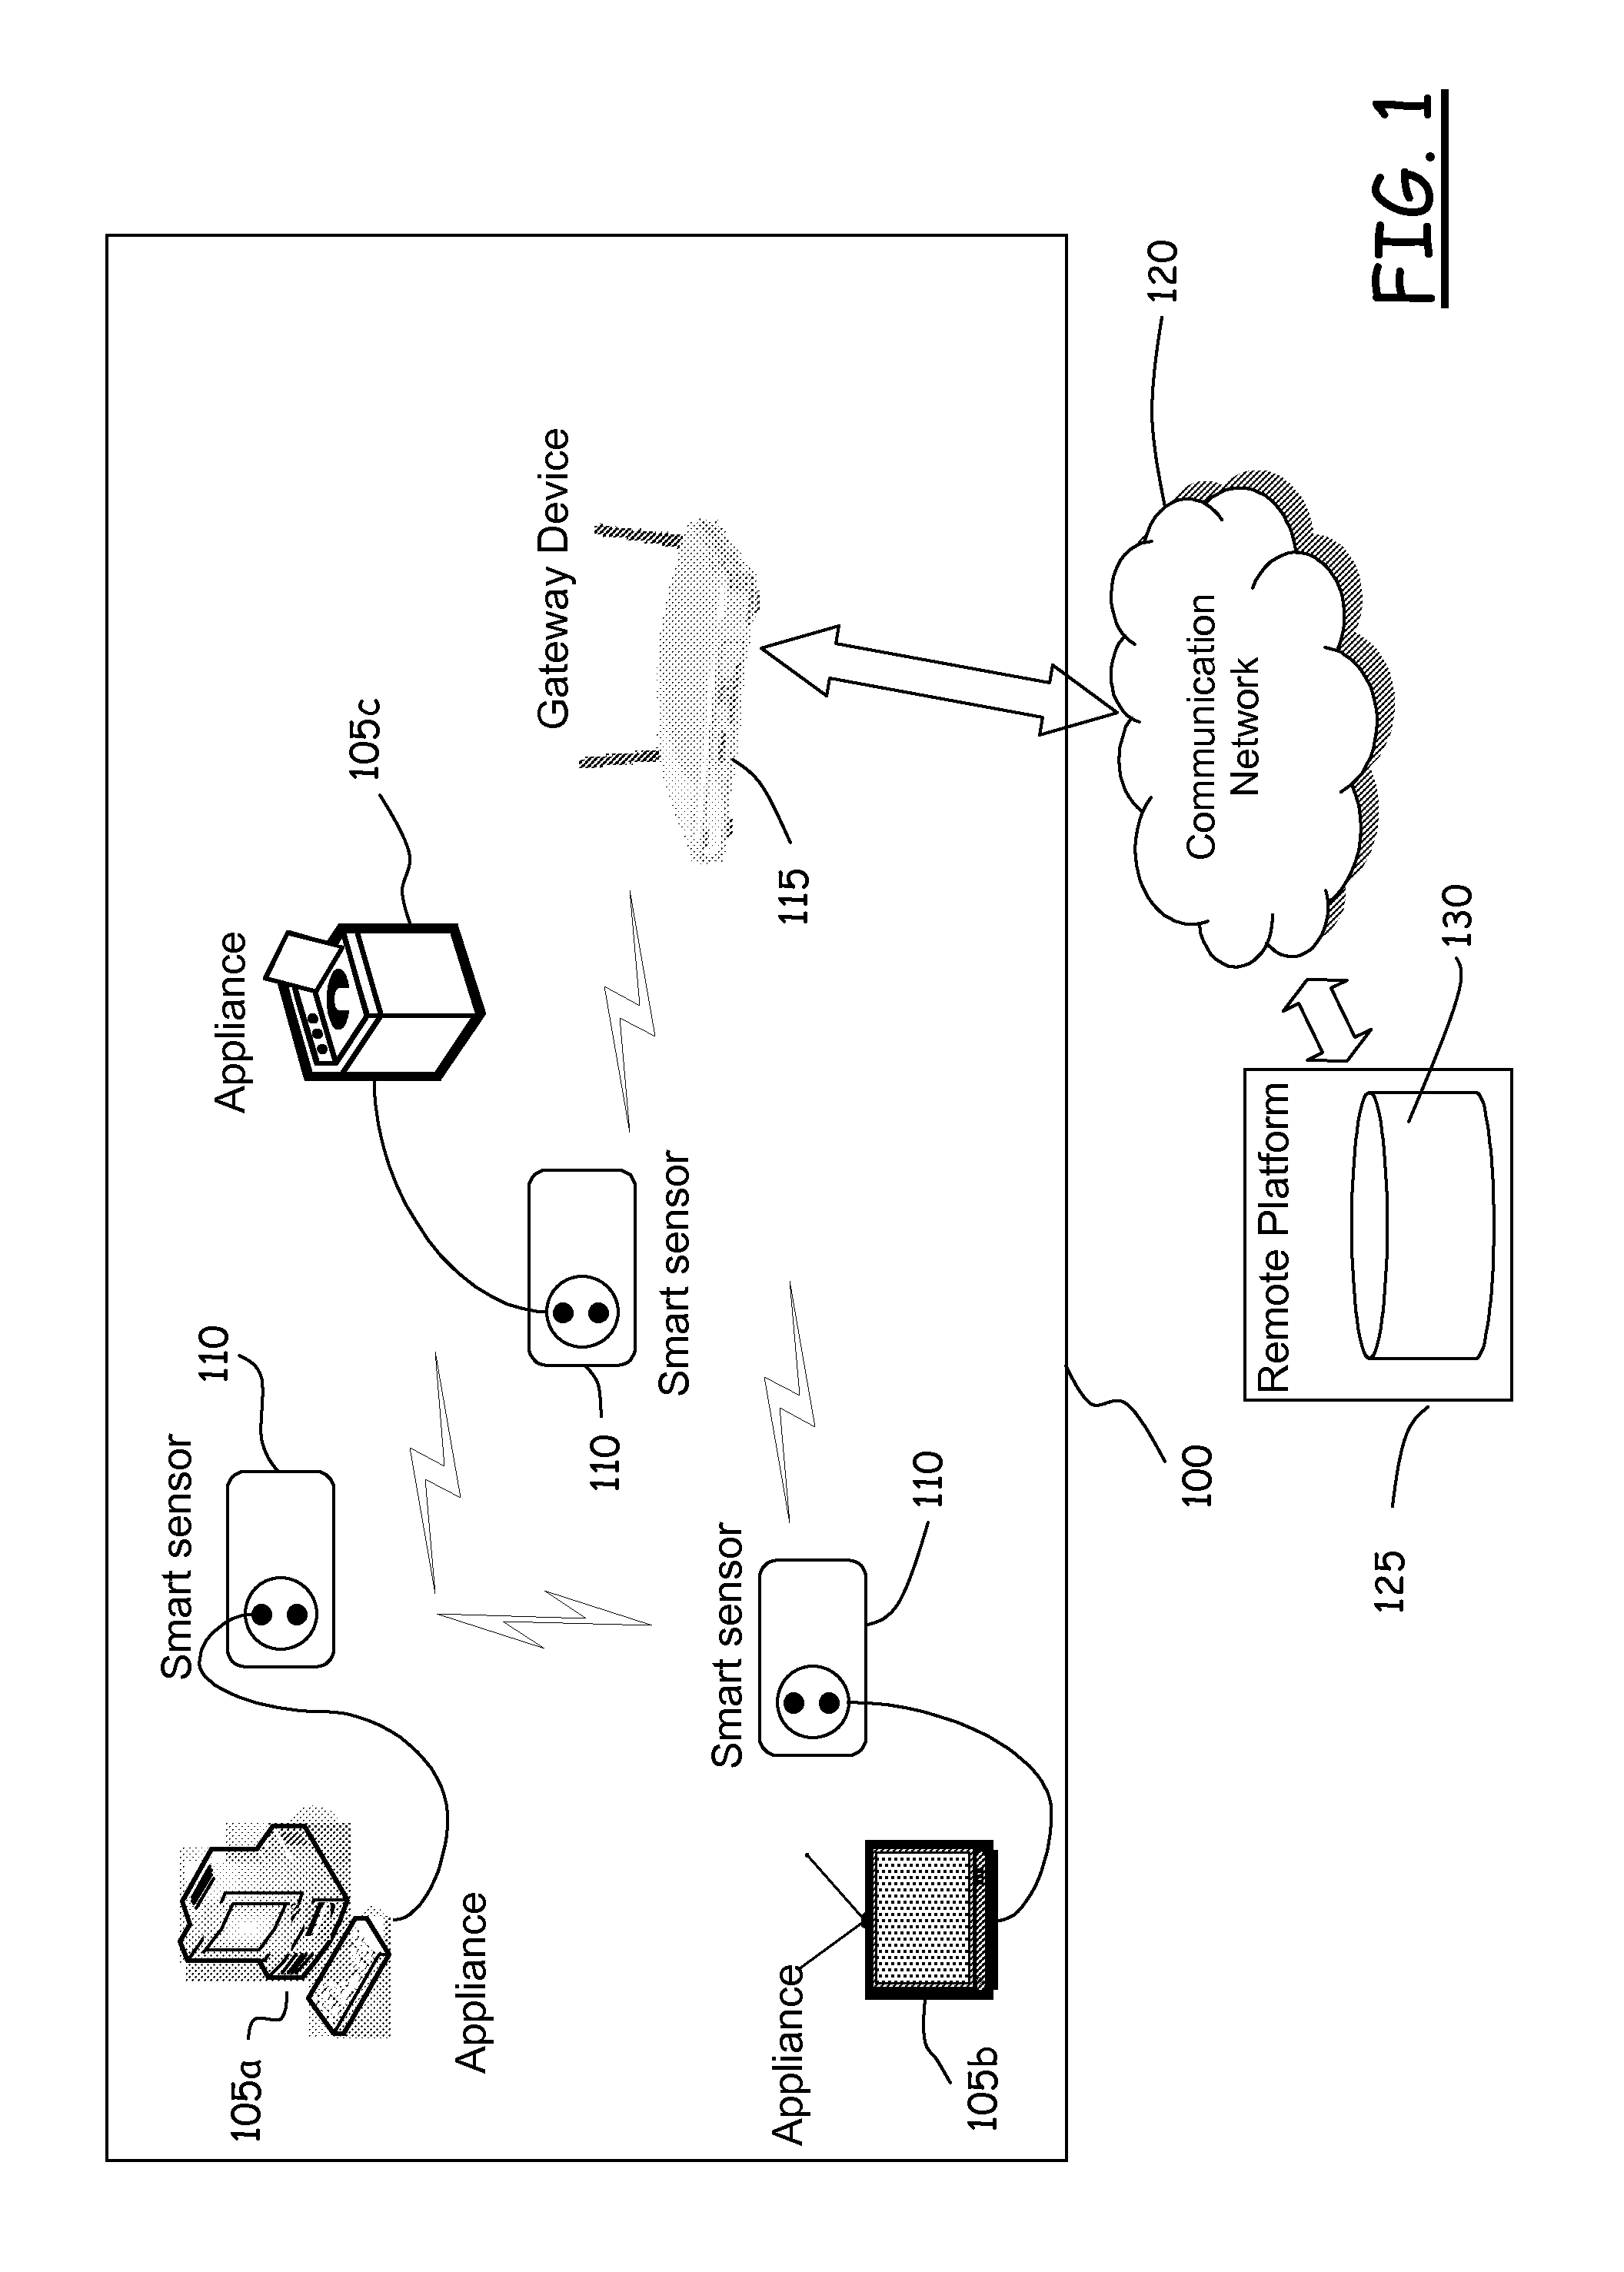 System and method for the automatic identification of electric devices/appliances